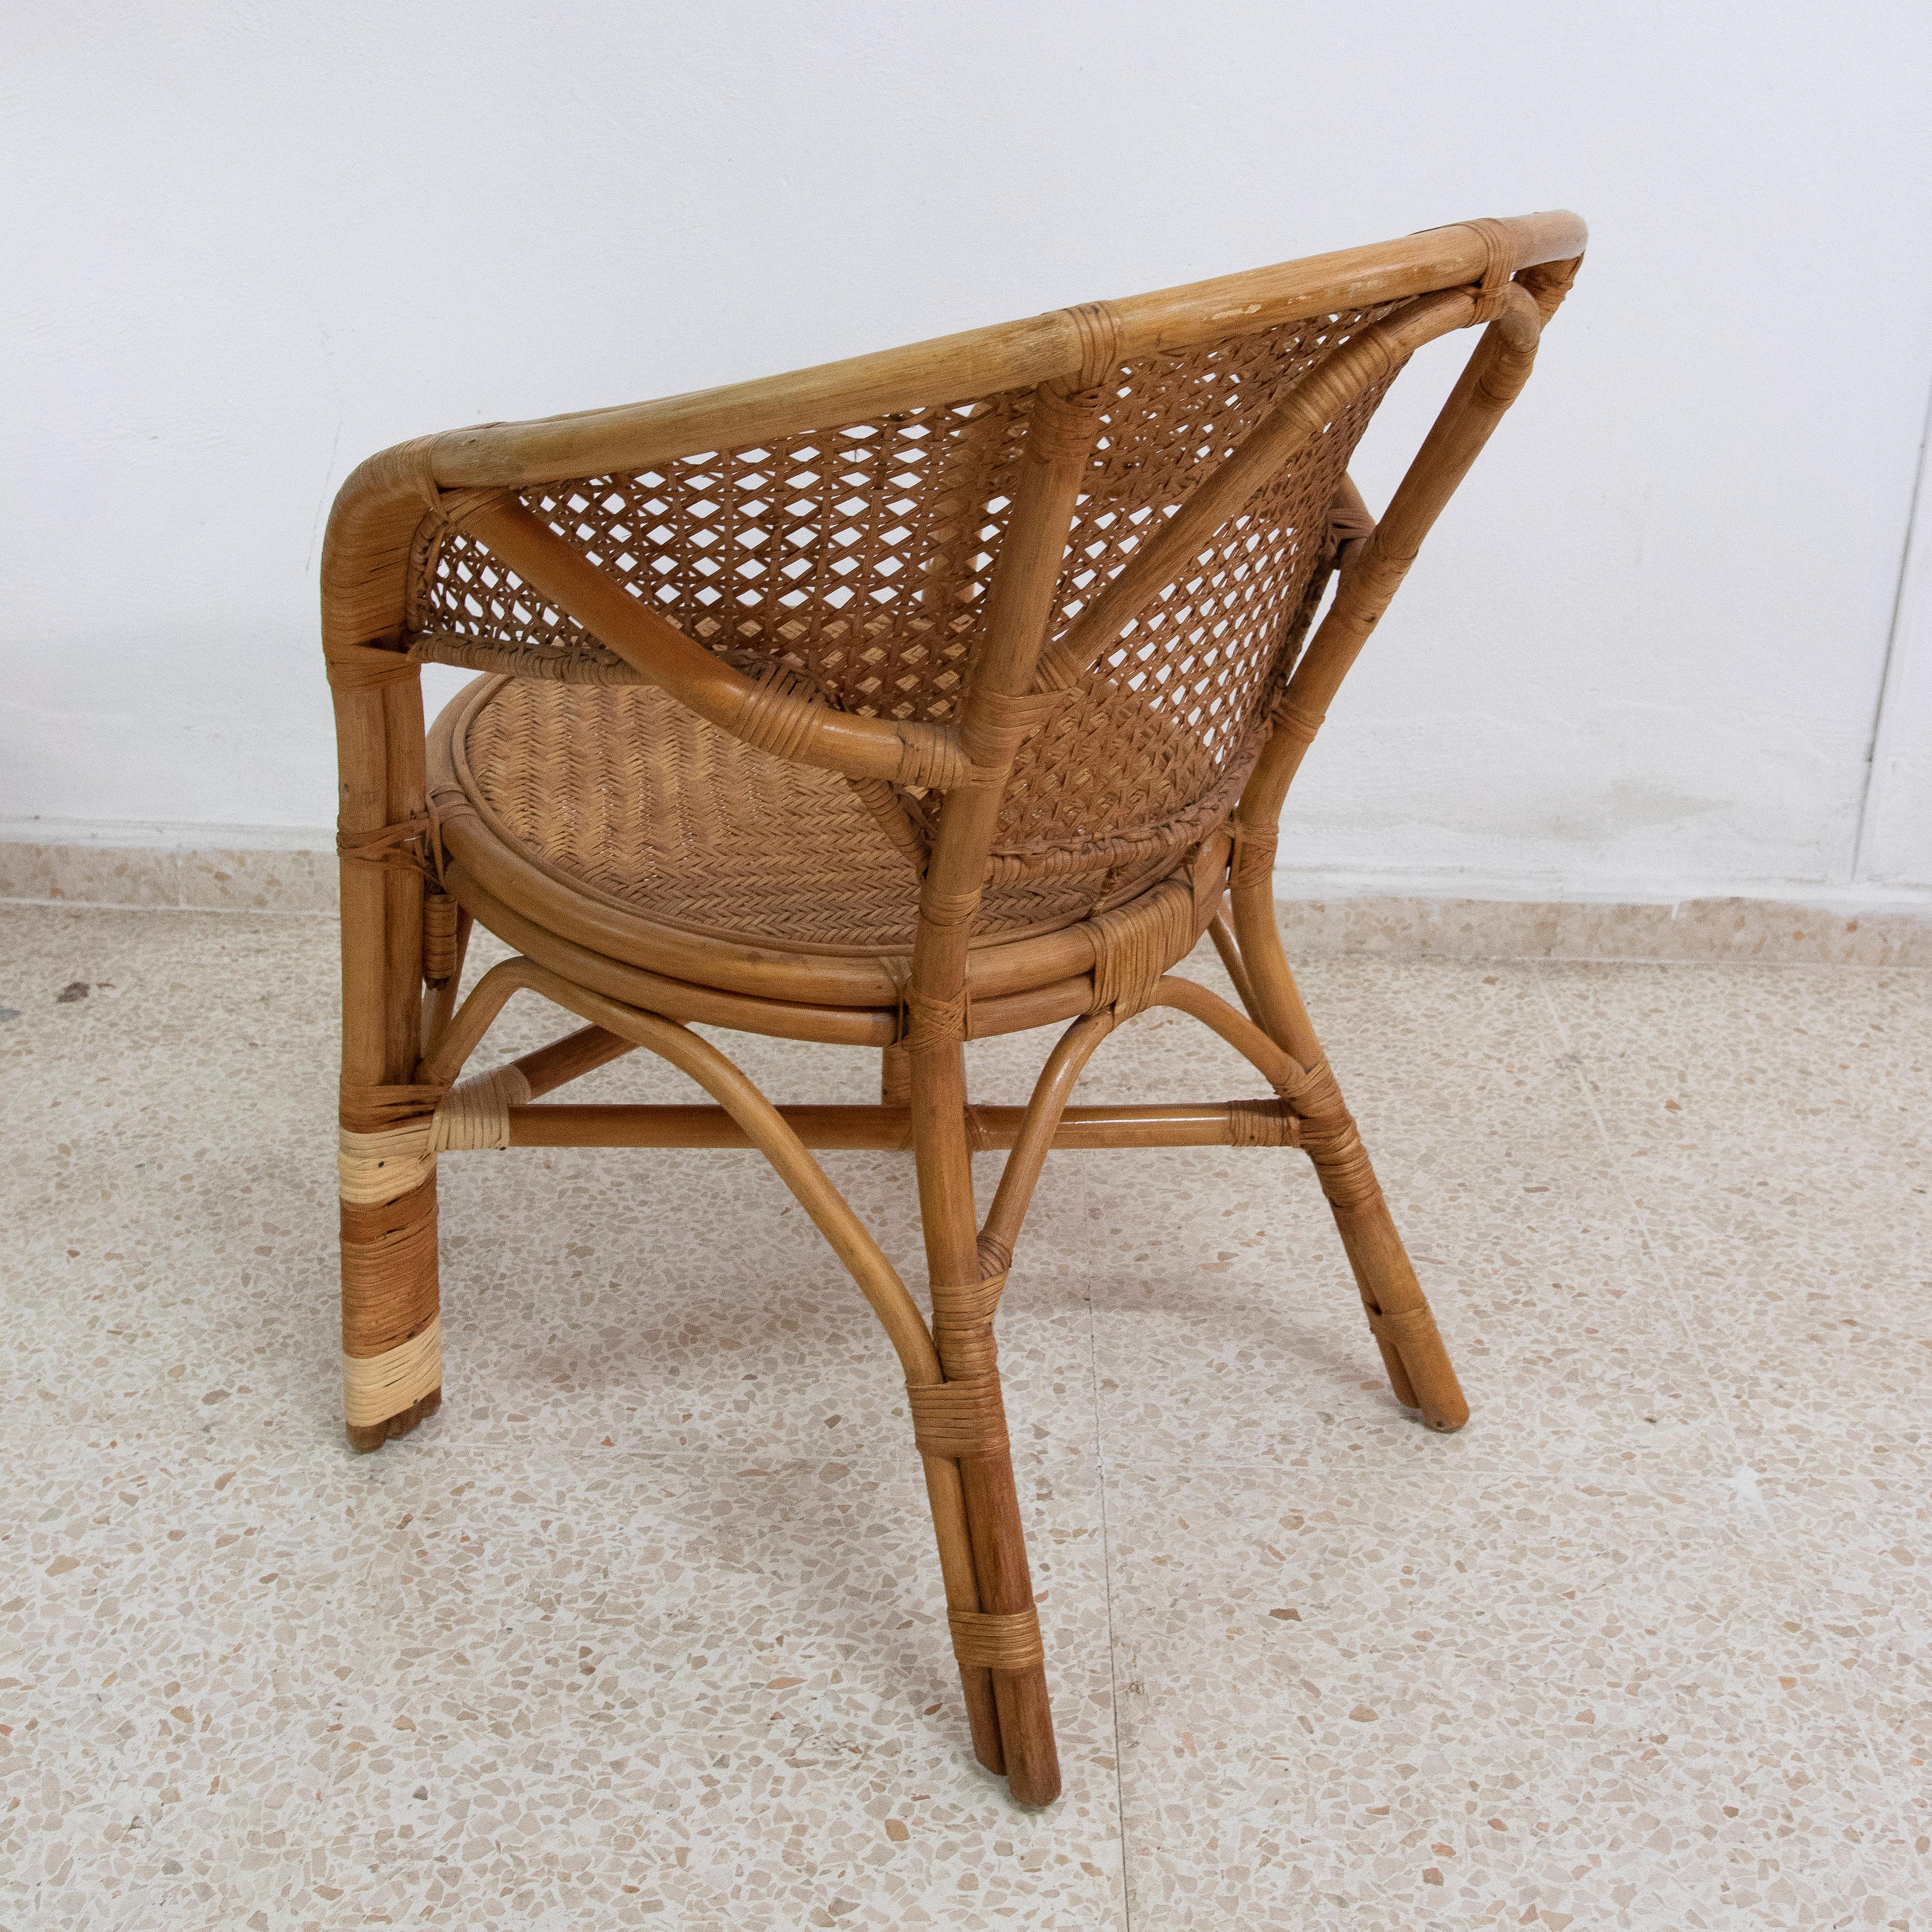 20th Century 1950s Wicker and Bamboo Armchair with Mesh Backrest For Sale